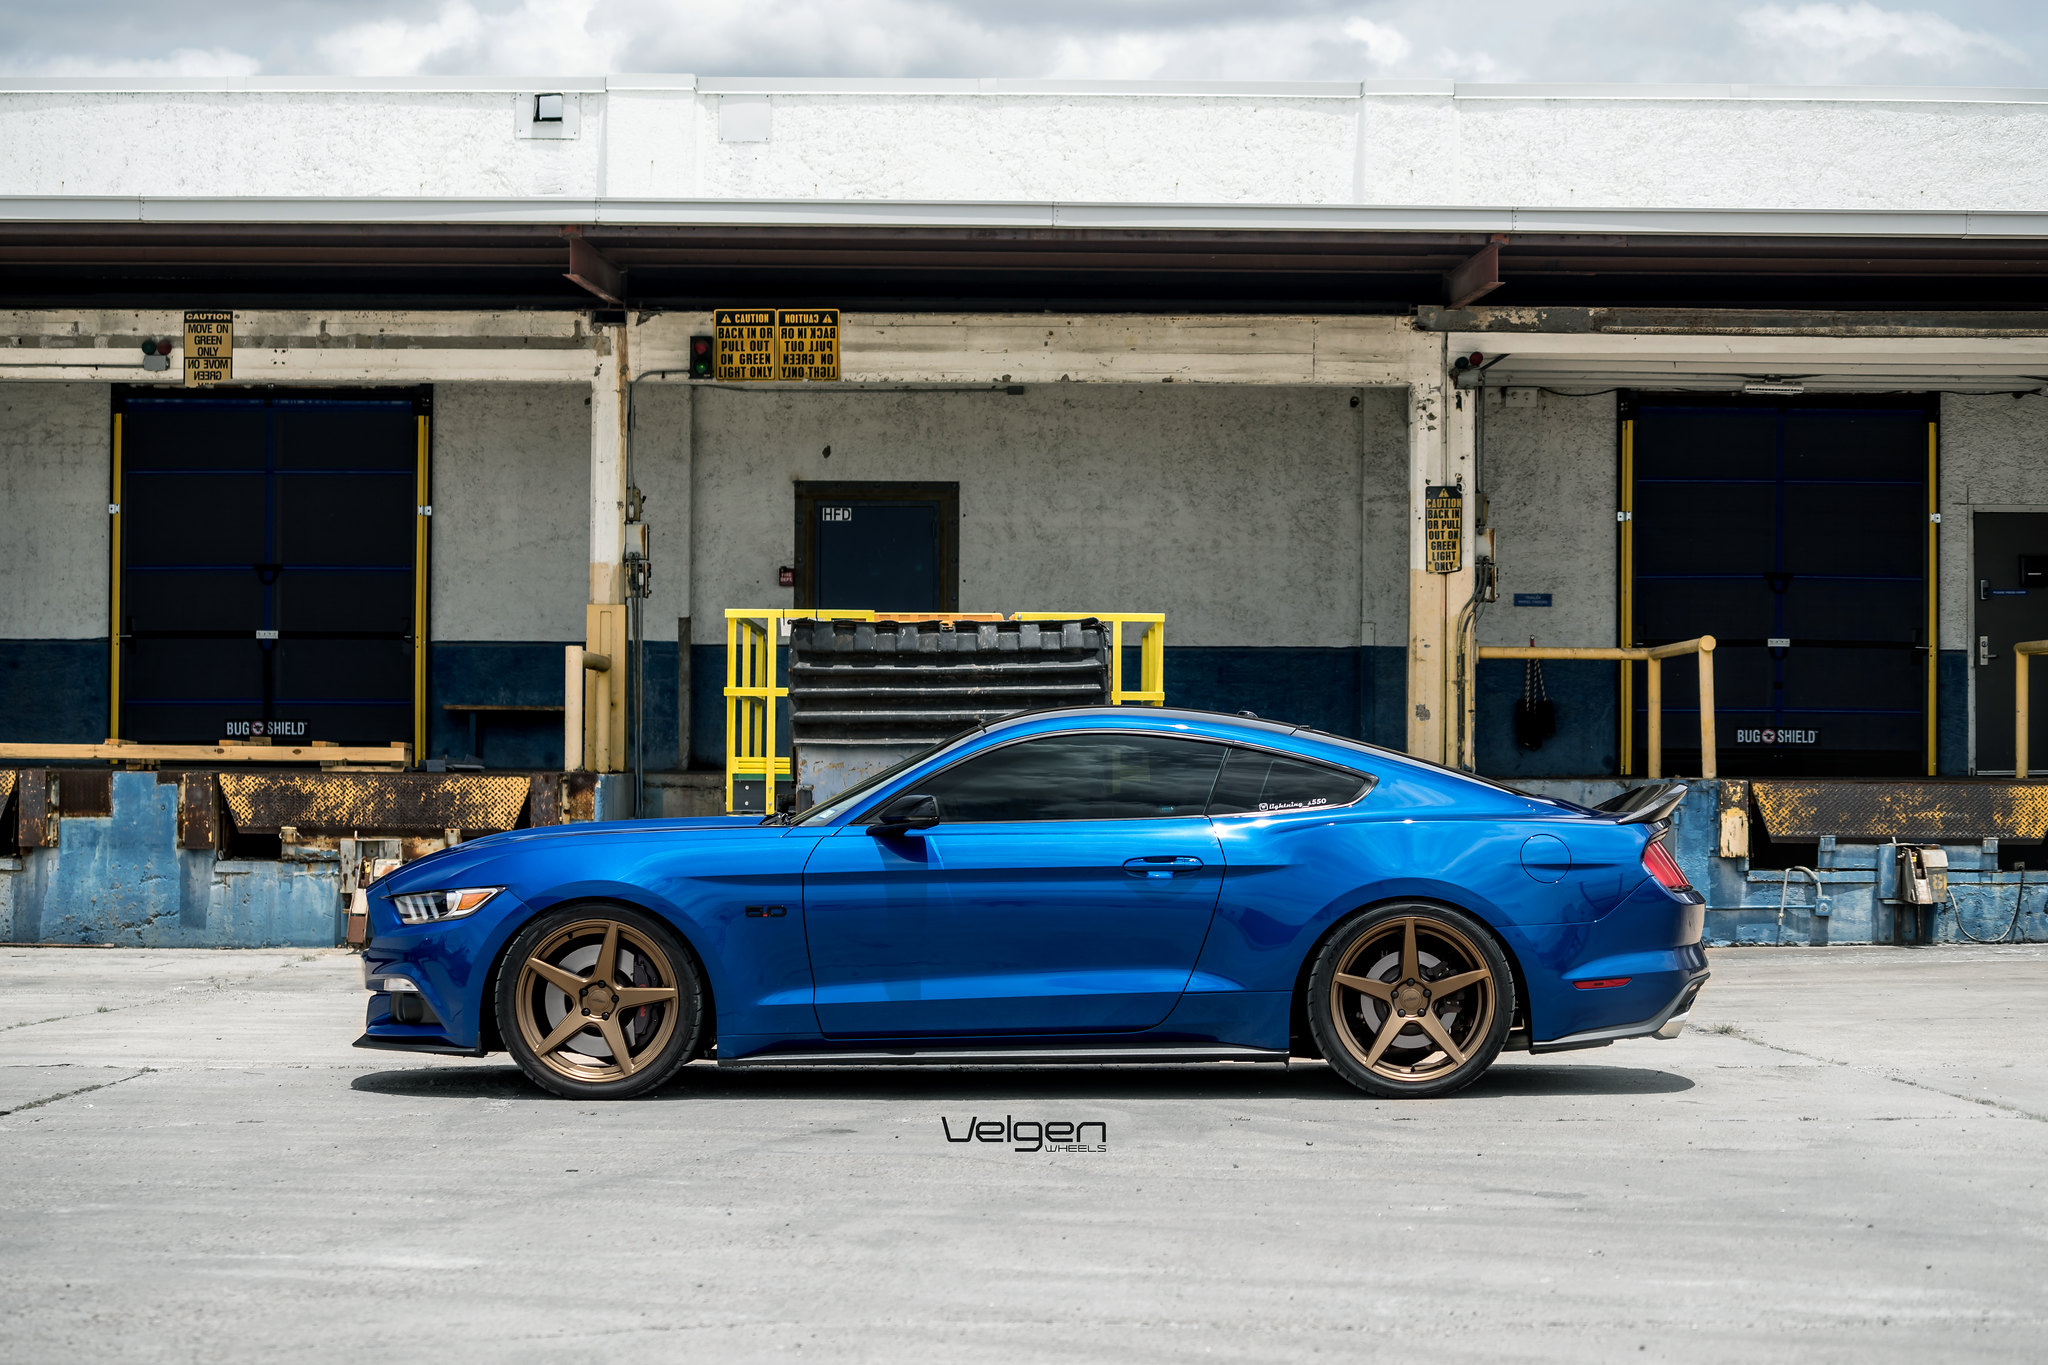 S650 Mustang Velgen wheels for your S650 Mustang | Vibe Motorsports 35452653520_d2a614f59b_k